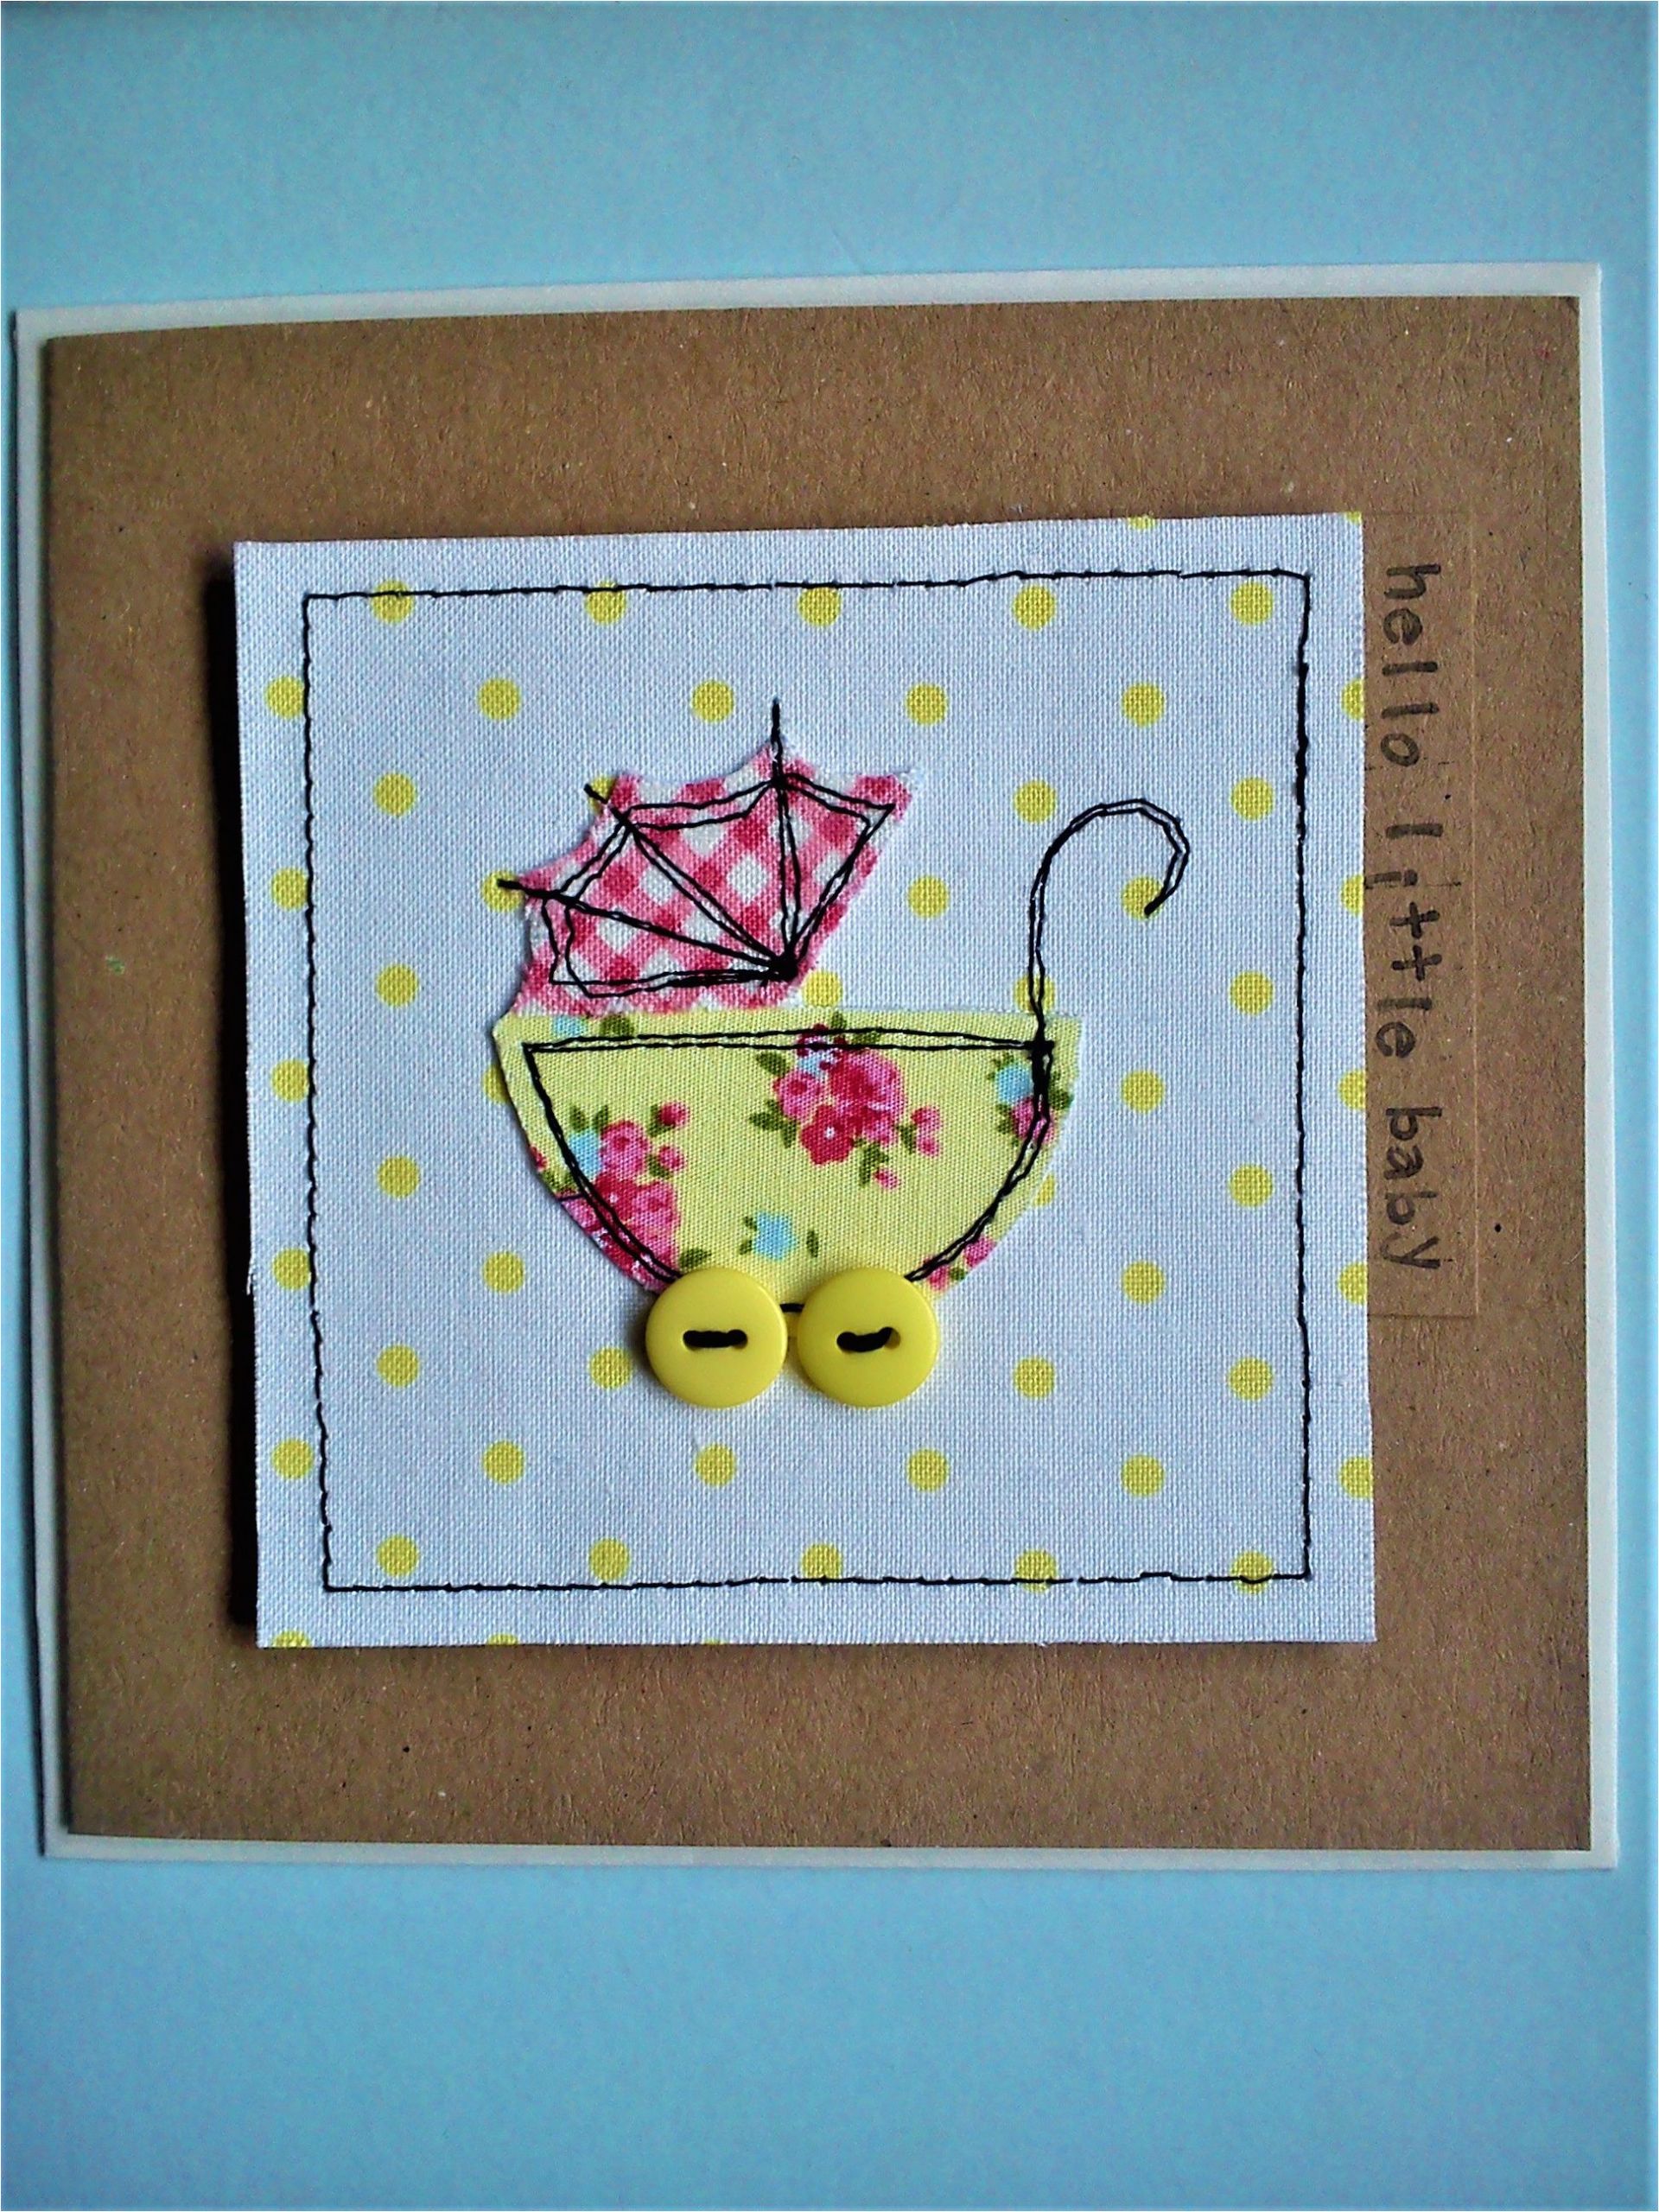 Unique New Baby Card Congrats Handmade Sewn New Baby Card Made with Pretty Fabrics and